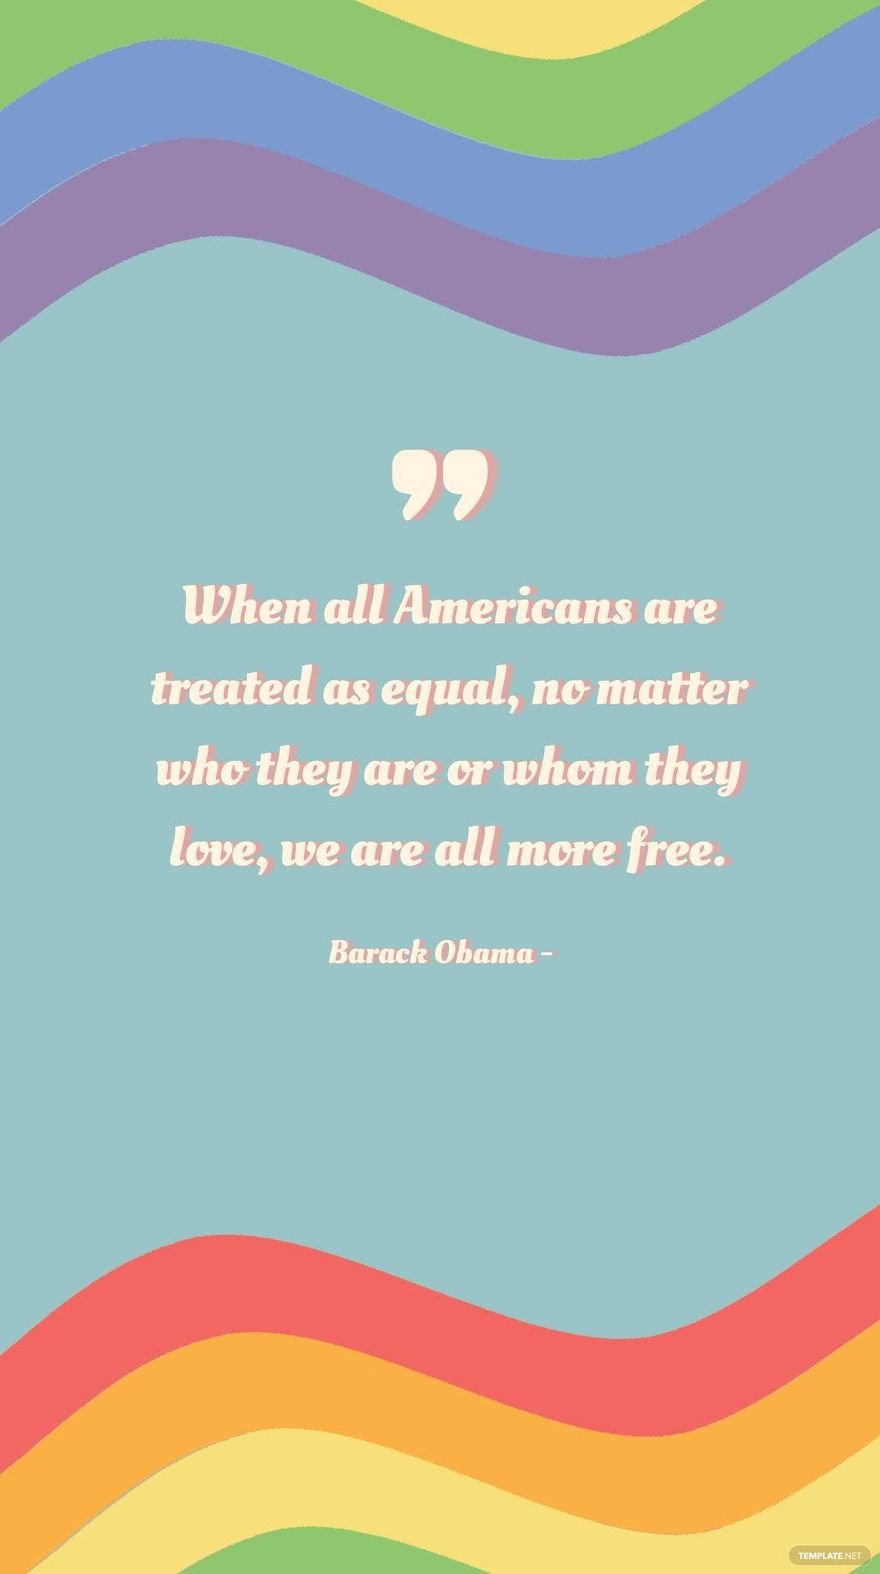 Barack Obama - When all Americans are treated as equal, no matter who they are or whom they love, we are all more free.